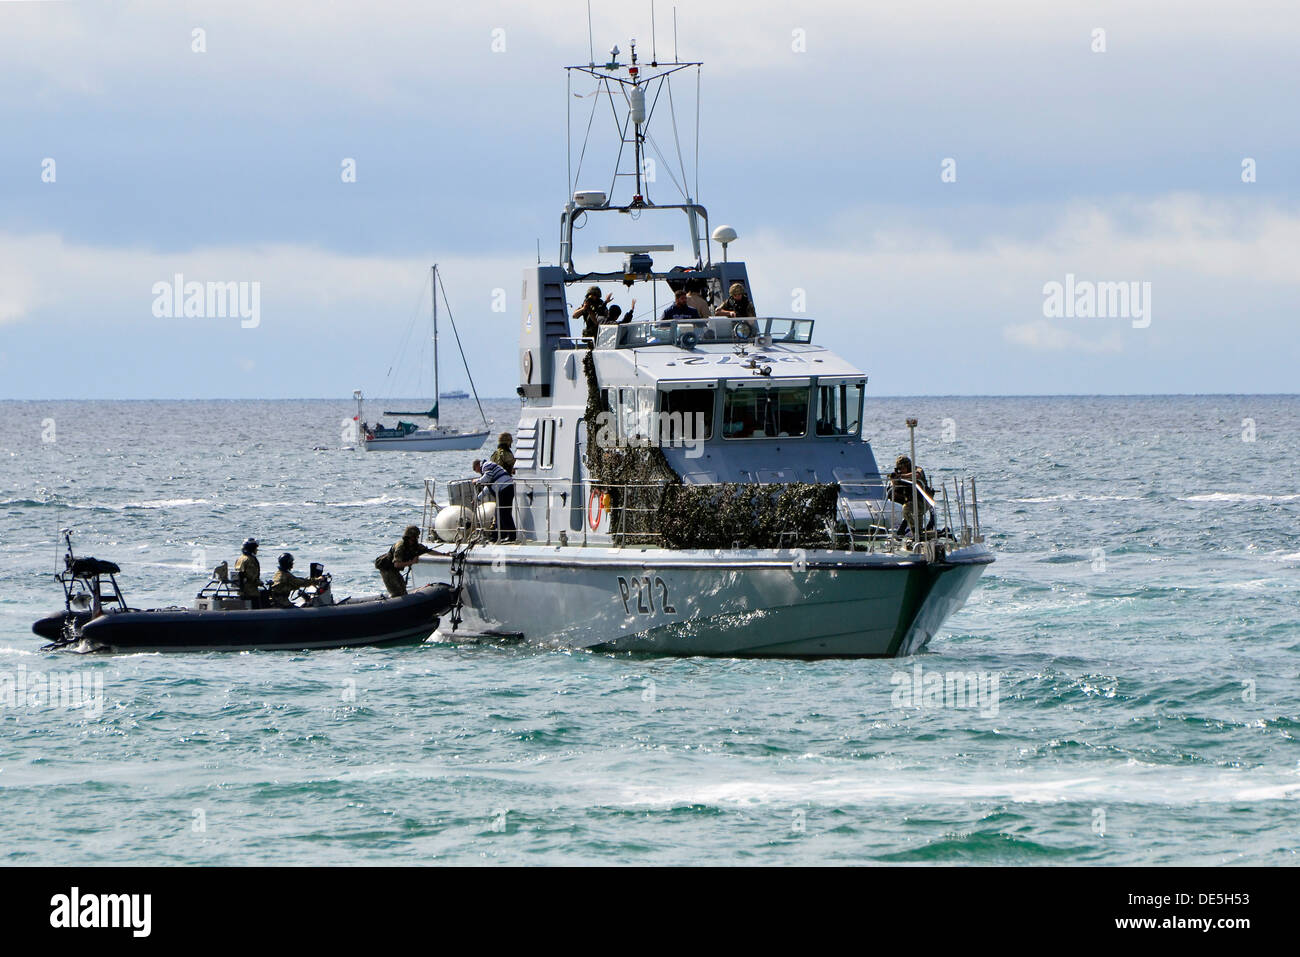 HMS Smiter an Archer-class patrol and training vessel of the British Royal Navy taking part in an anti-piracy demonstration. Stock Photo